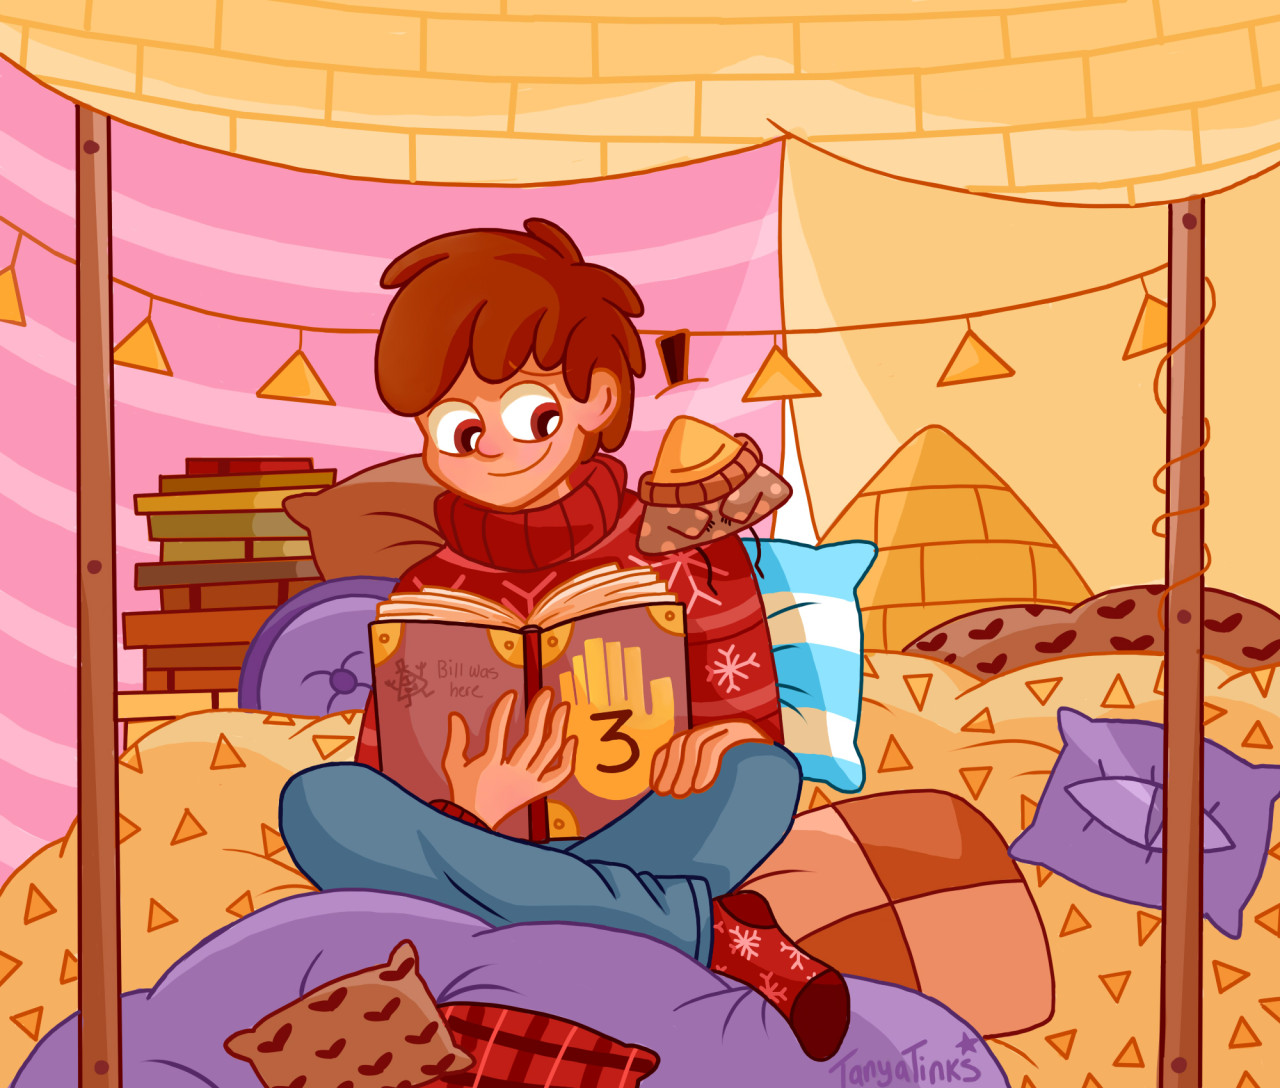 Finally got something done for a Billdip week at last even if I rushed.
Pillow/blanket forts are my life and an excellent place to cuddle and stay warm.